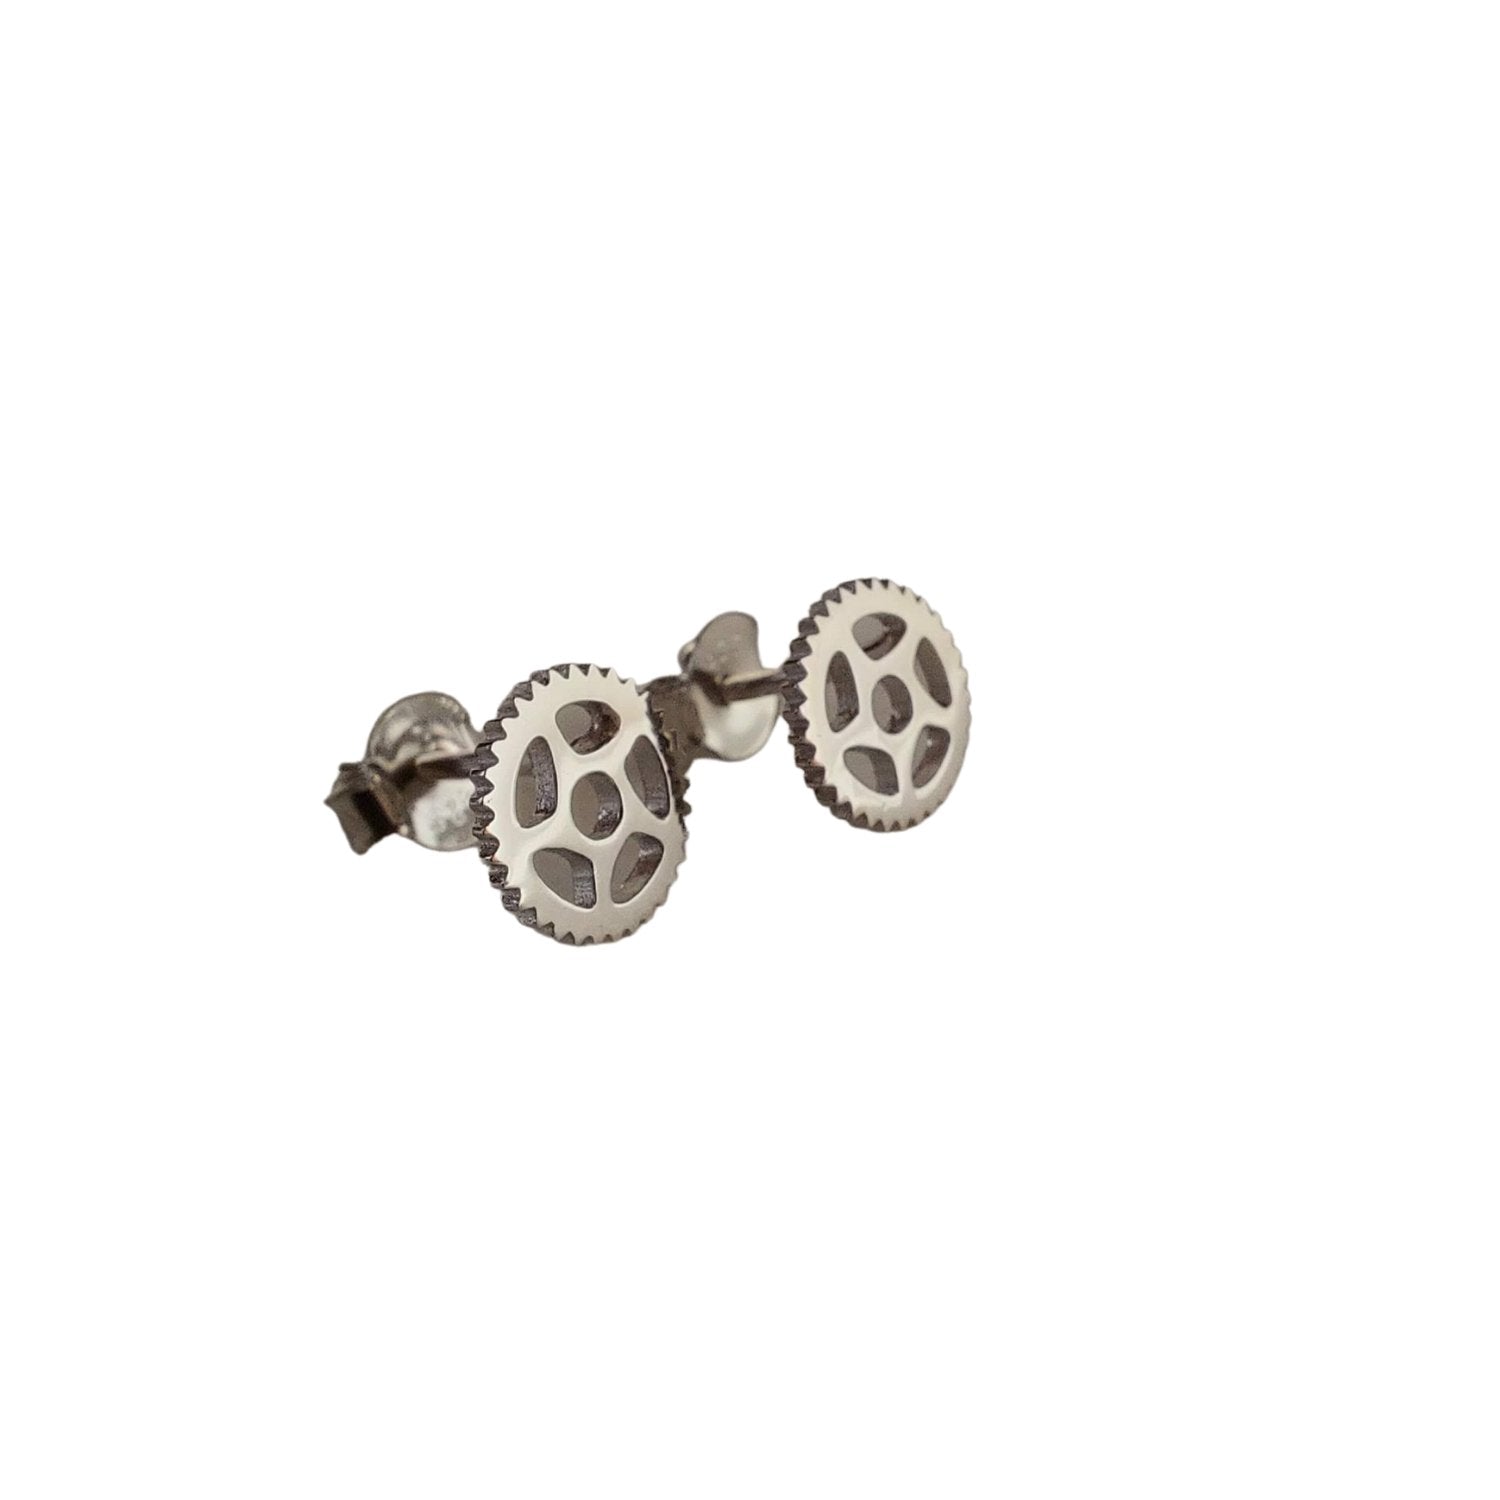 Rhodium Plated sterling silver bike chain ring stud earrings with white background